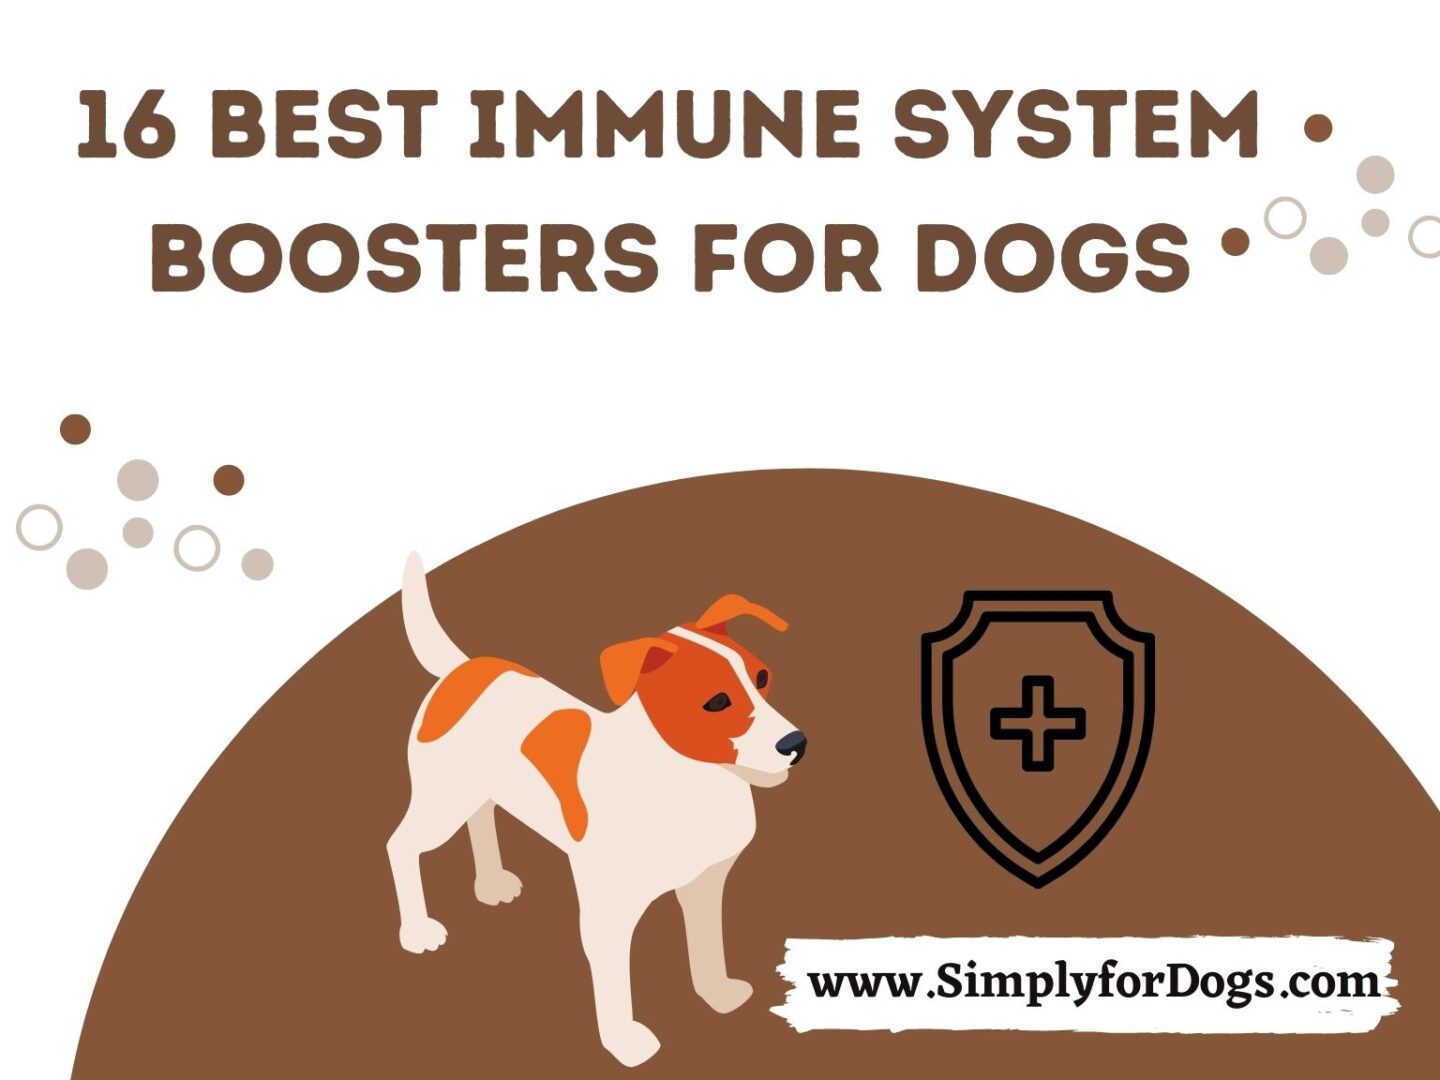 16 Best Immune System Boosters for Dogs